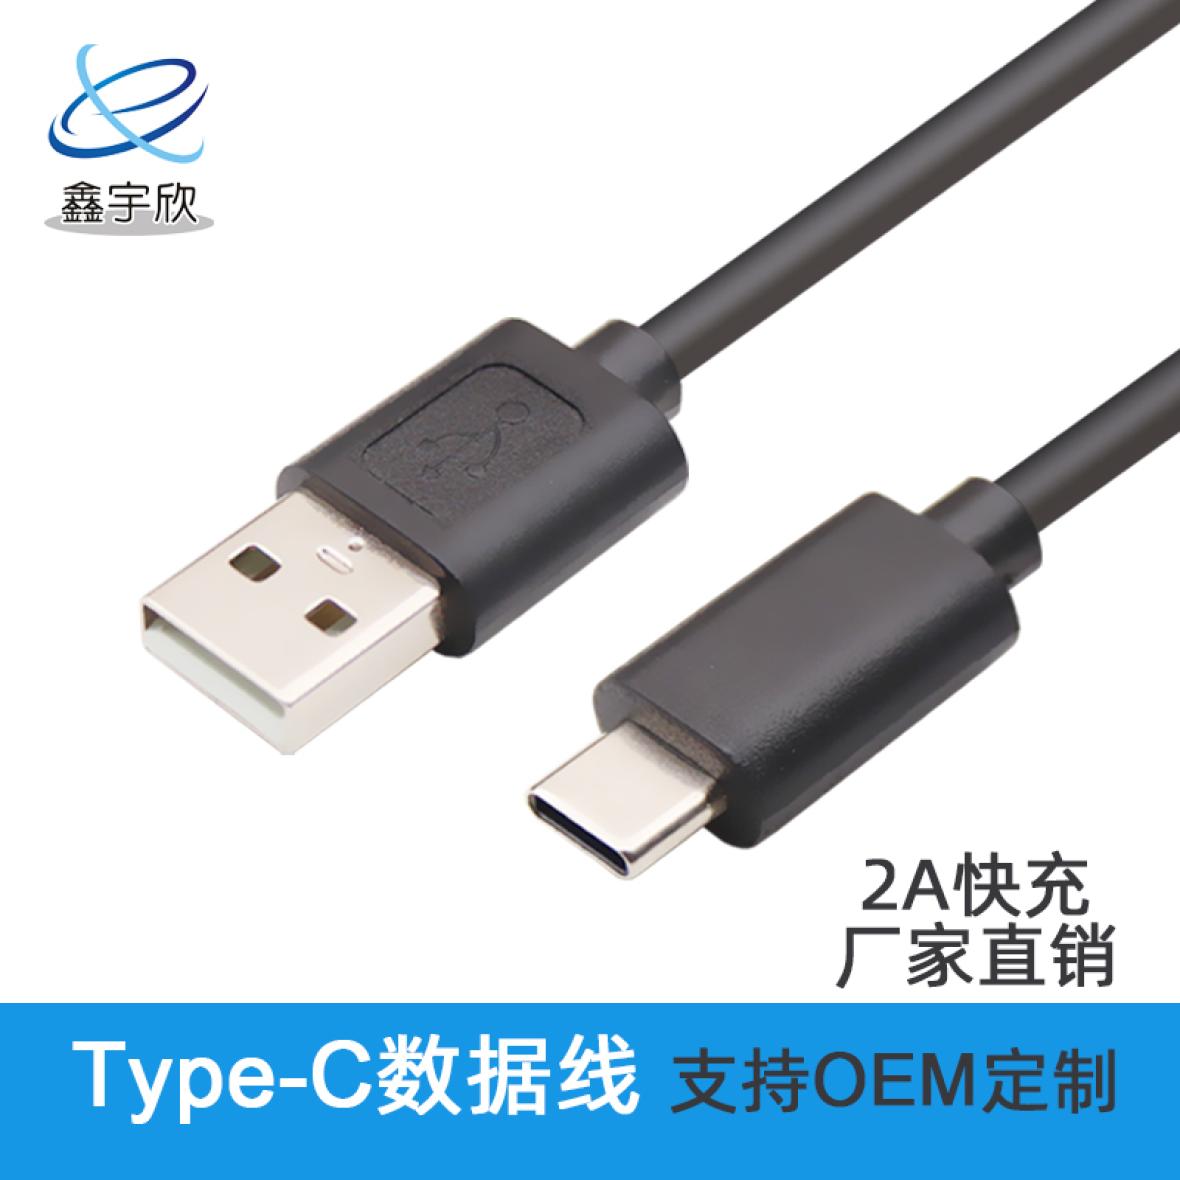  USB2.0 male to Type-C male mobile phone charging data cable